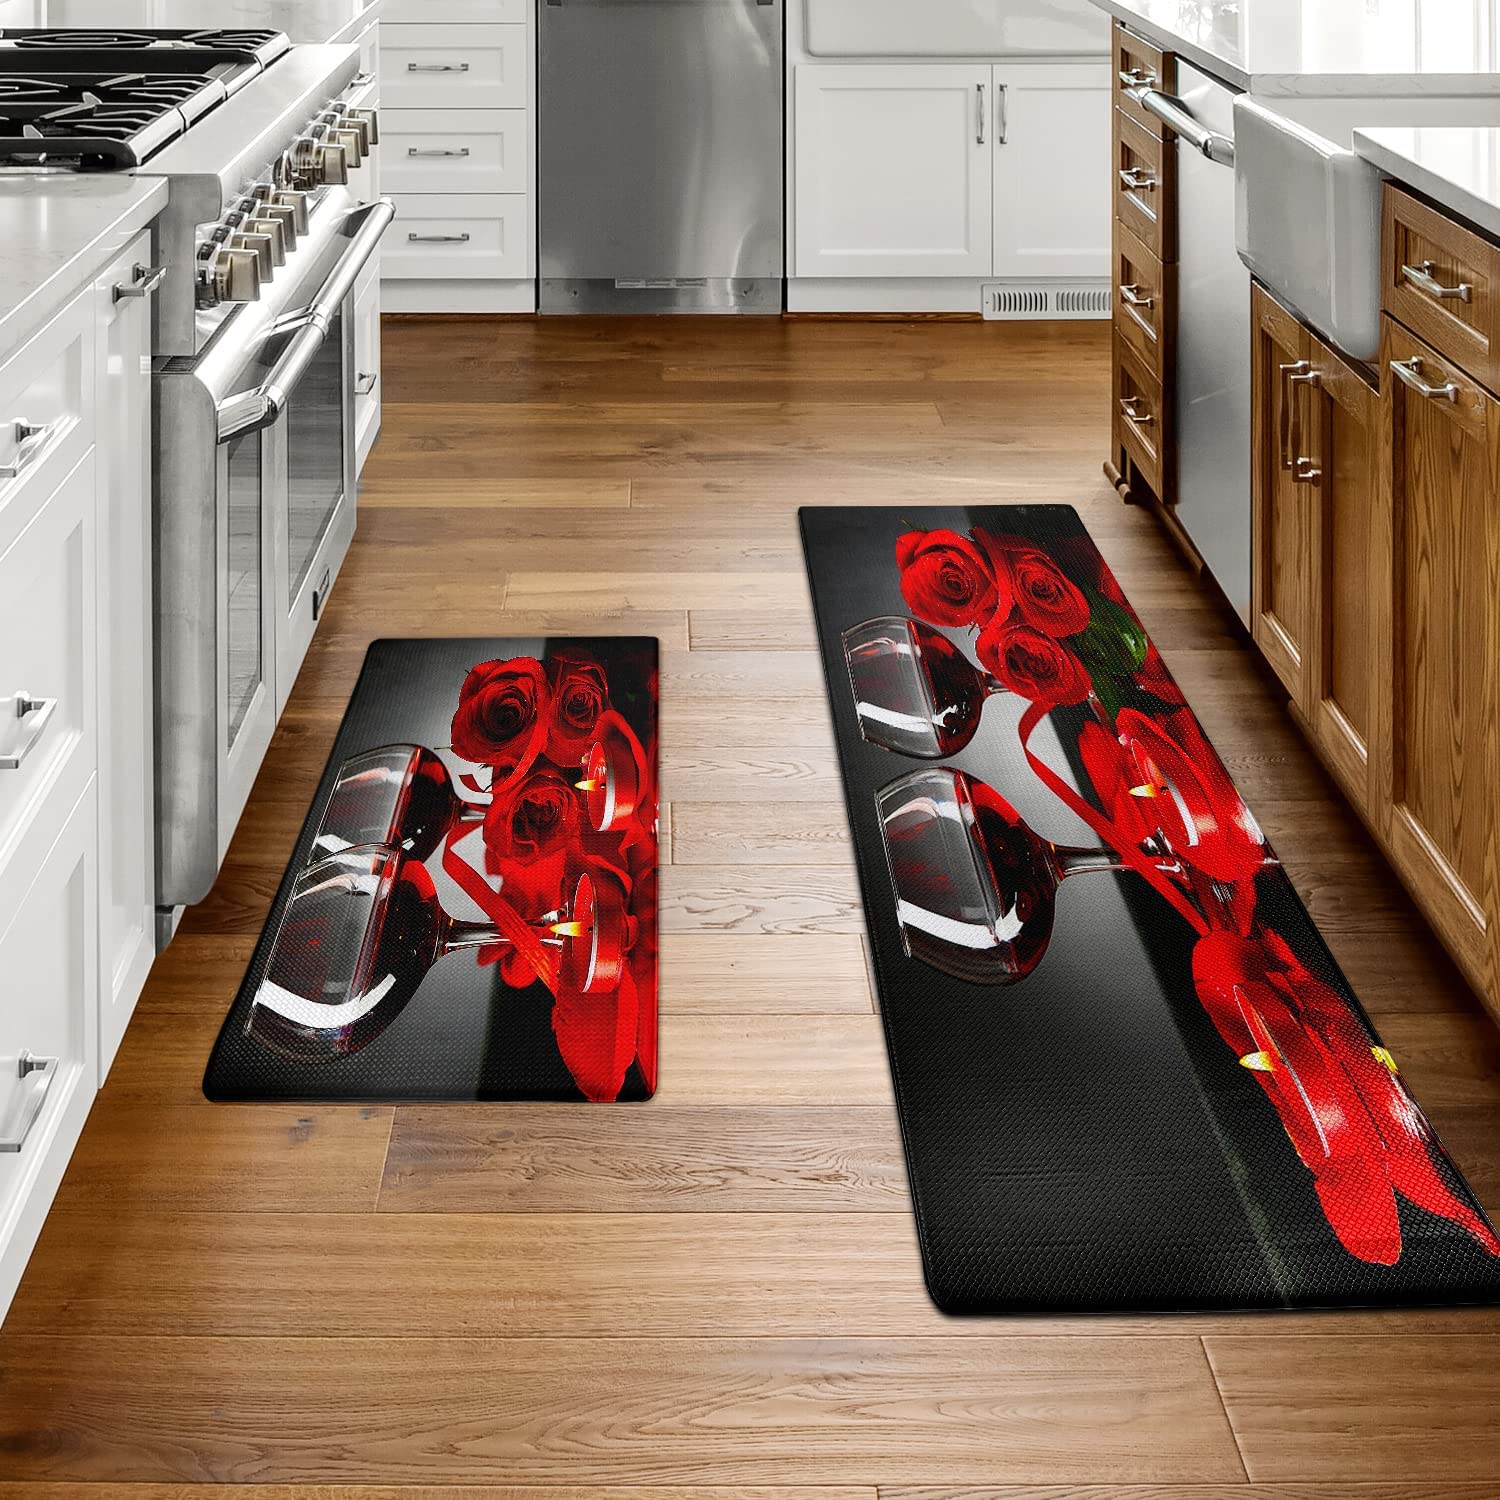 Modern Kitchen Rugs, Utility Mats and Runners